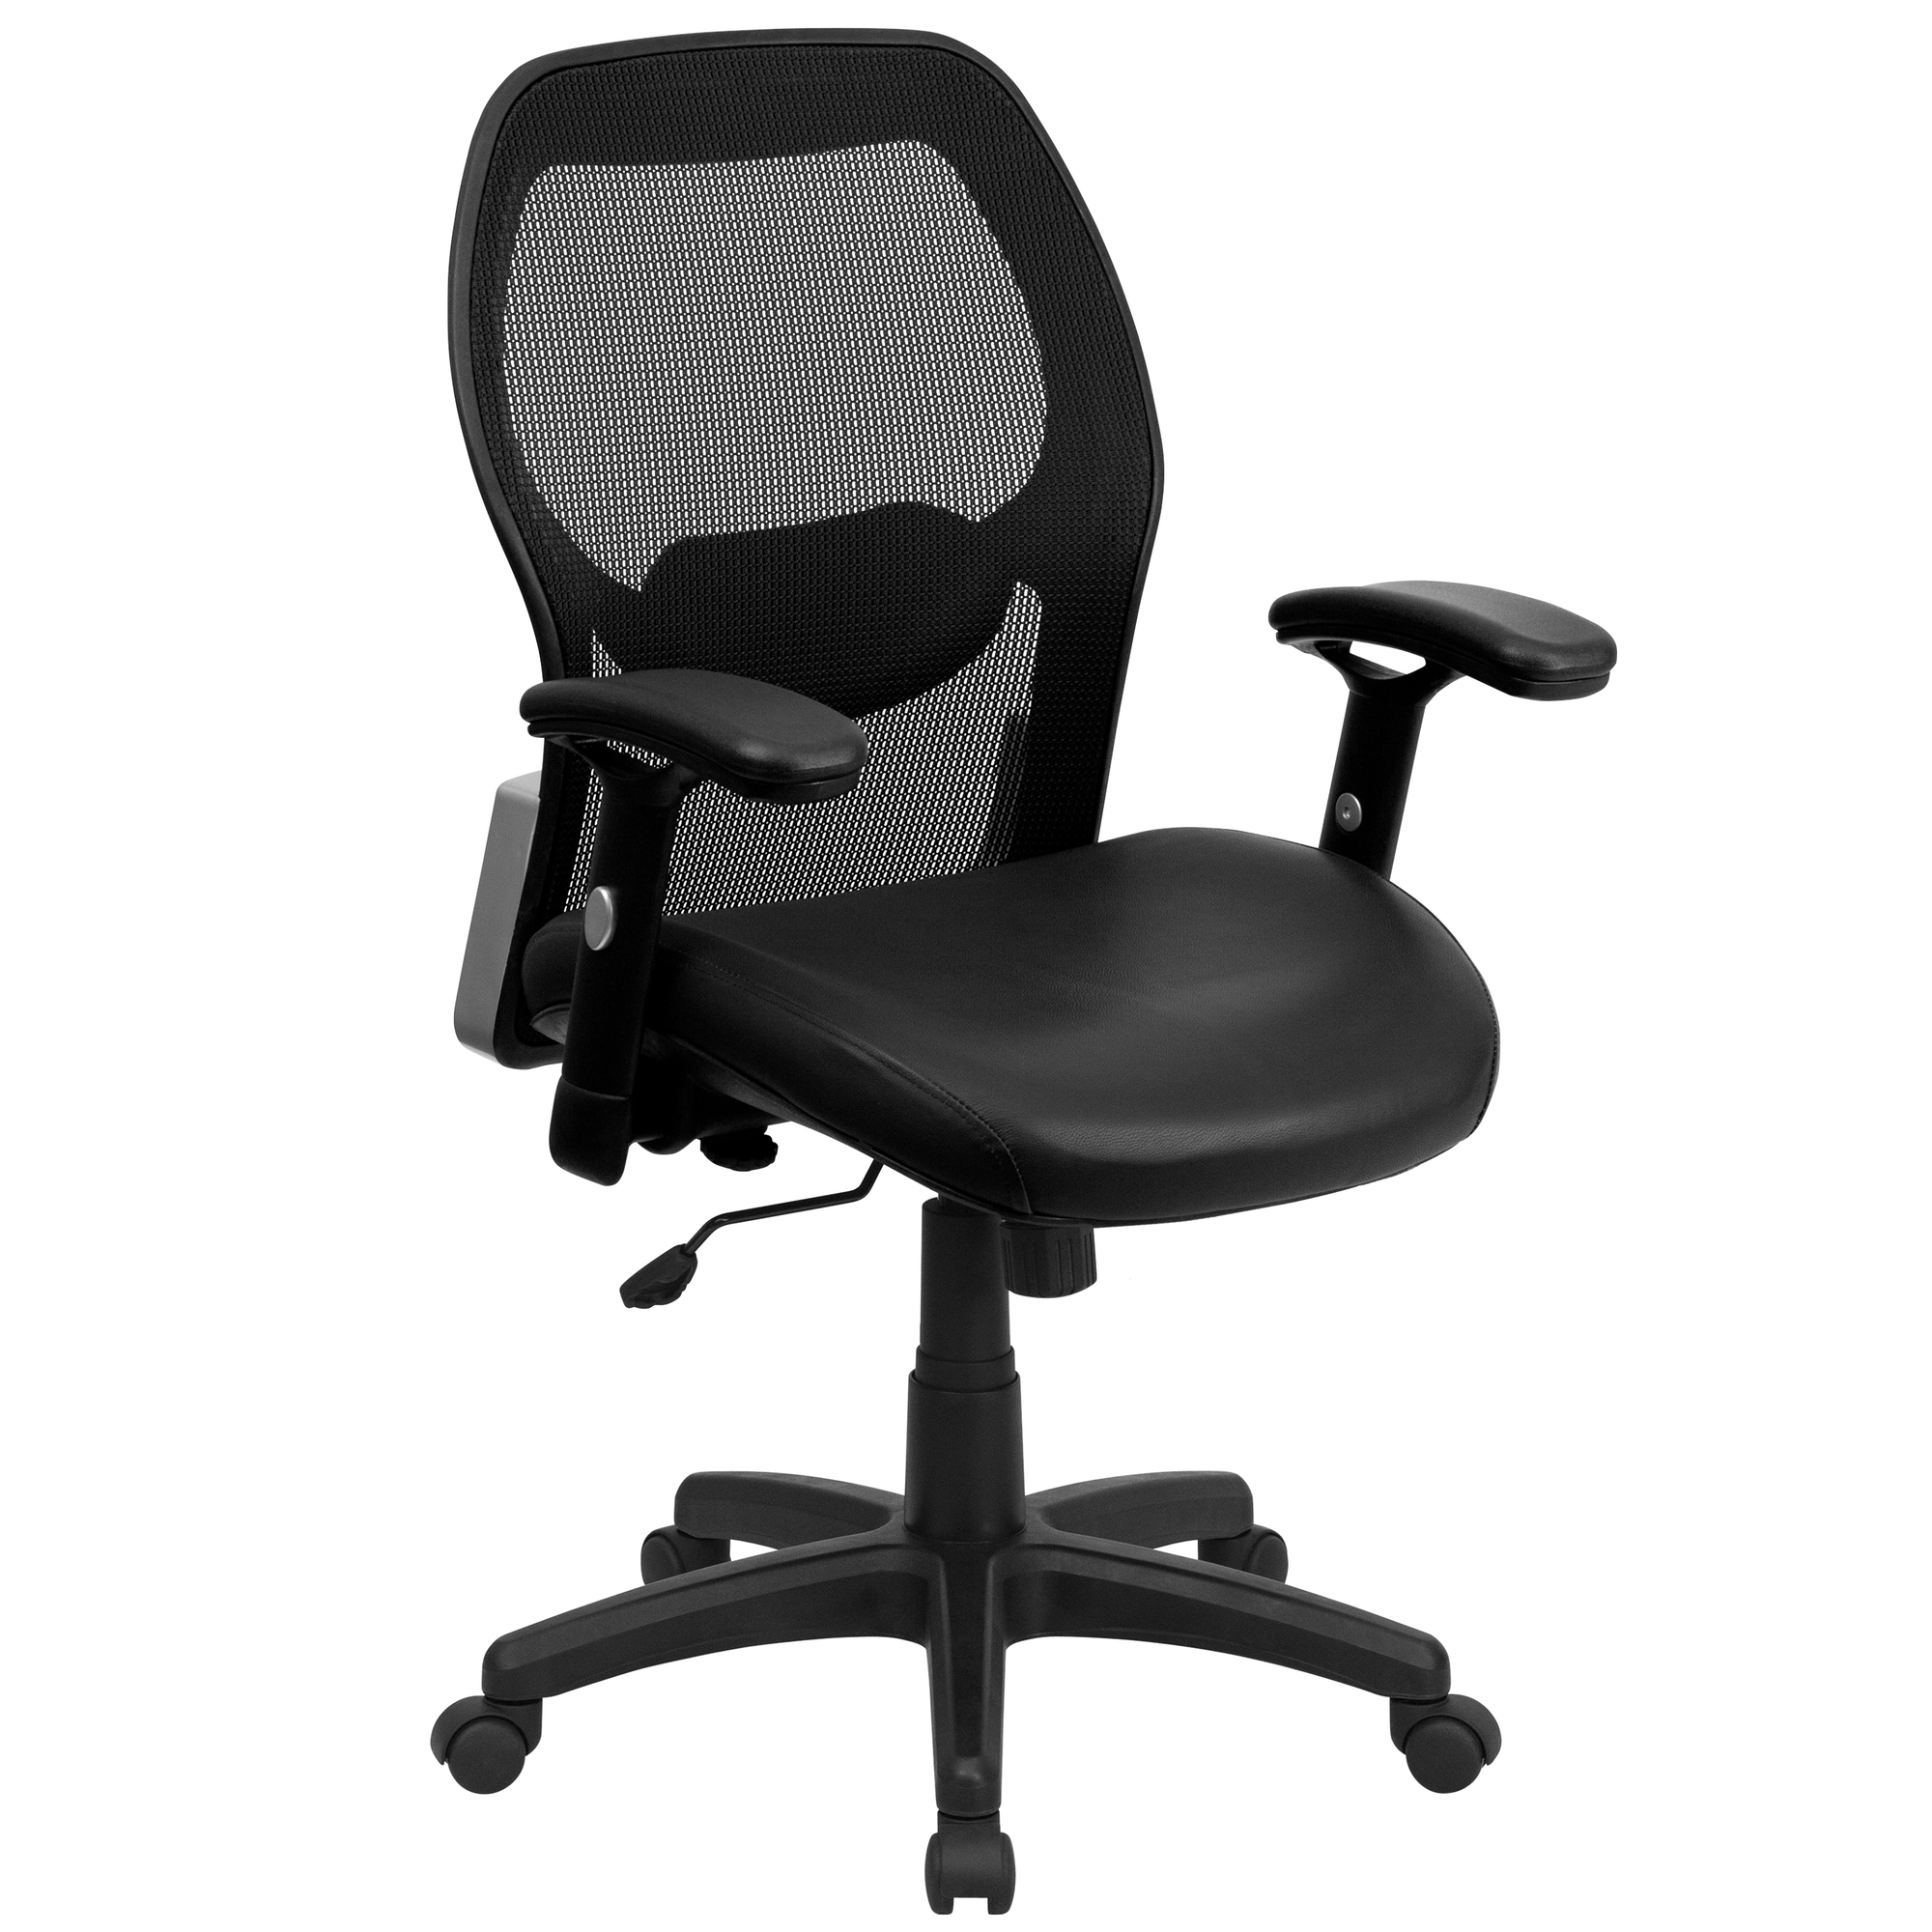 Flash Furniture, Mid-Back Black Super Mesh Chair w/LeatherSoft Seat, Primary Color Black, Included (qty.) 1, Model LFW42BLBK